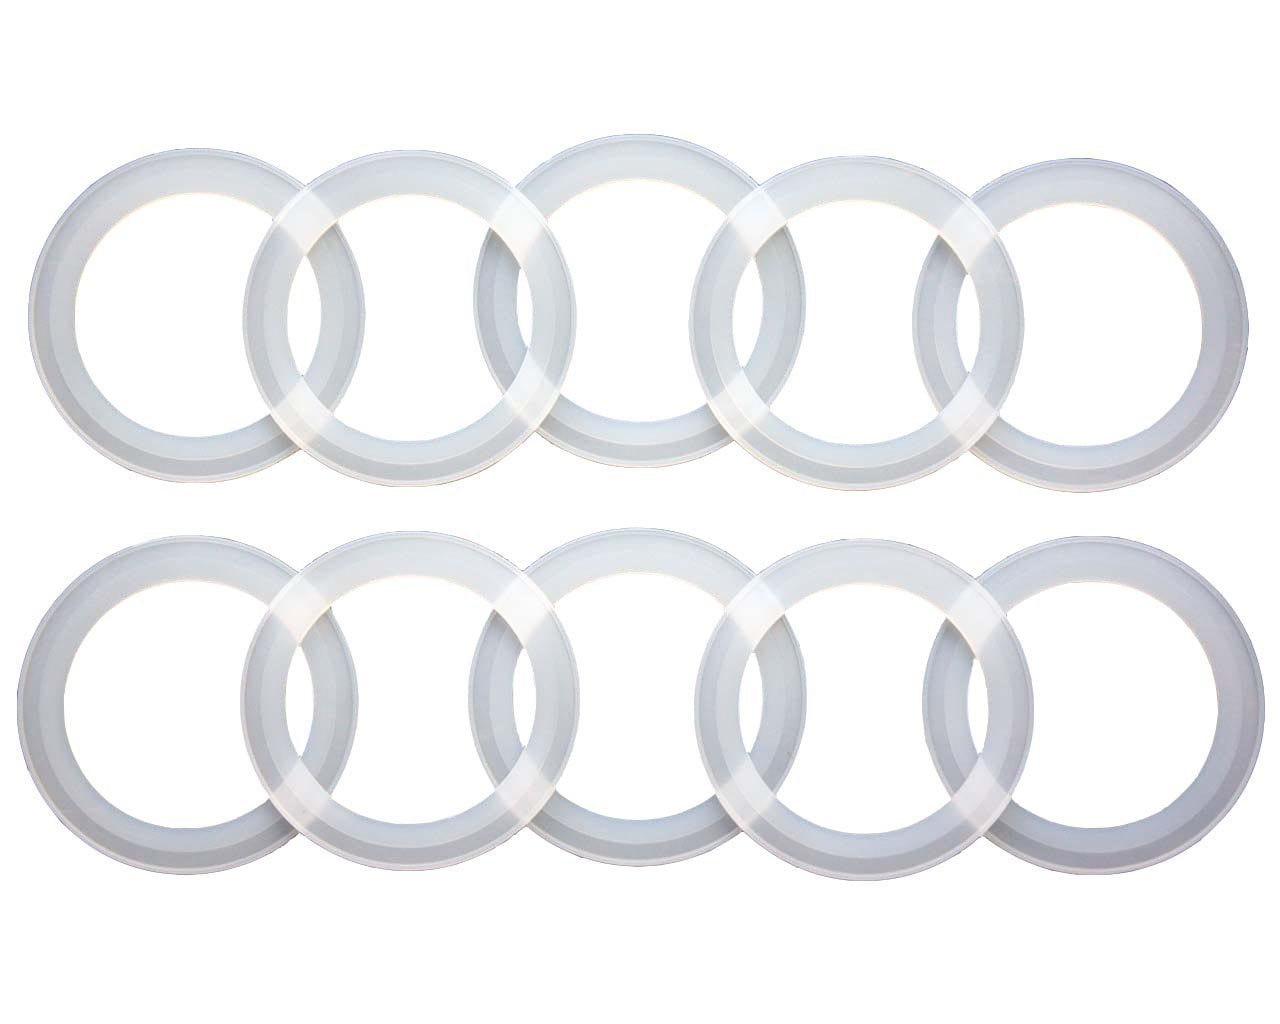 Details about   10Pcs Silicone Replacement Airtight Gasket Seals For Regular Mouth Canning Jars 